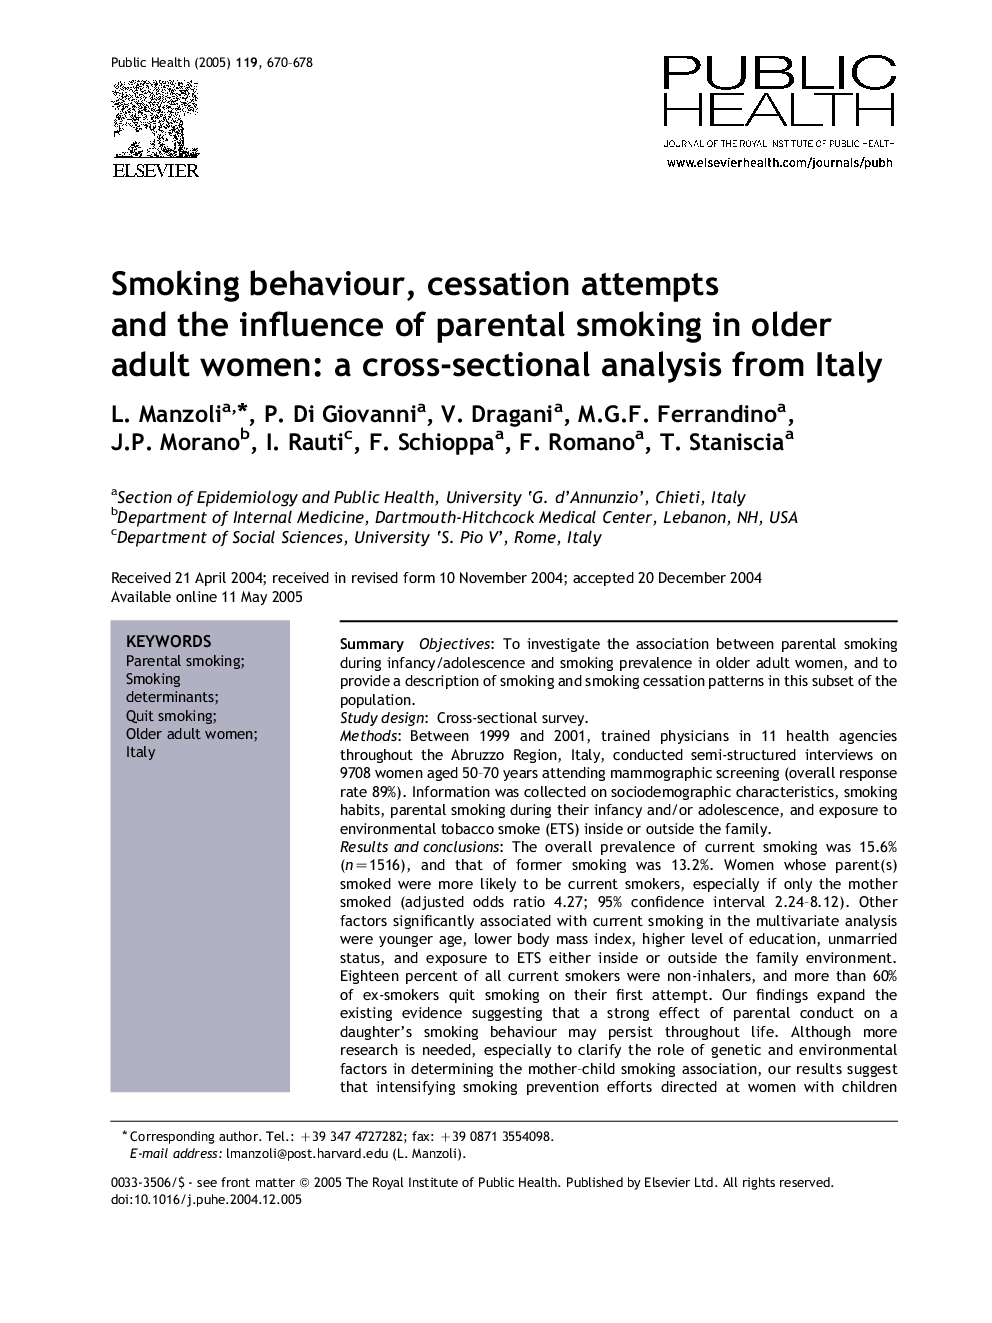 Smoking behaviour, cessation attempts and the influence of parental smoking in older adult women: a cross-sectional analysis from Italy